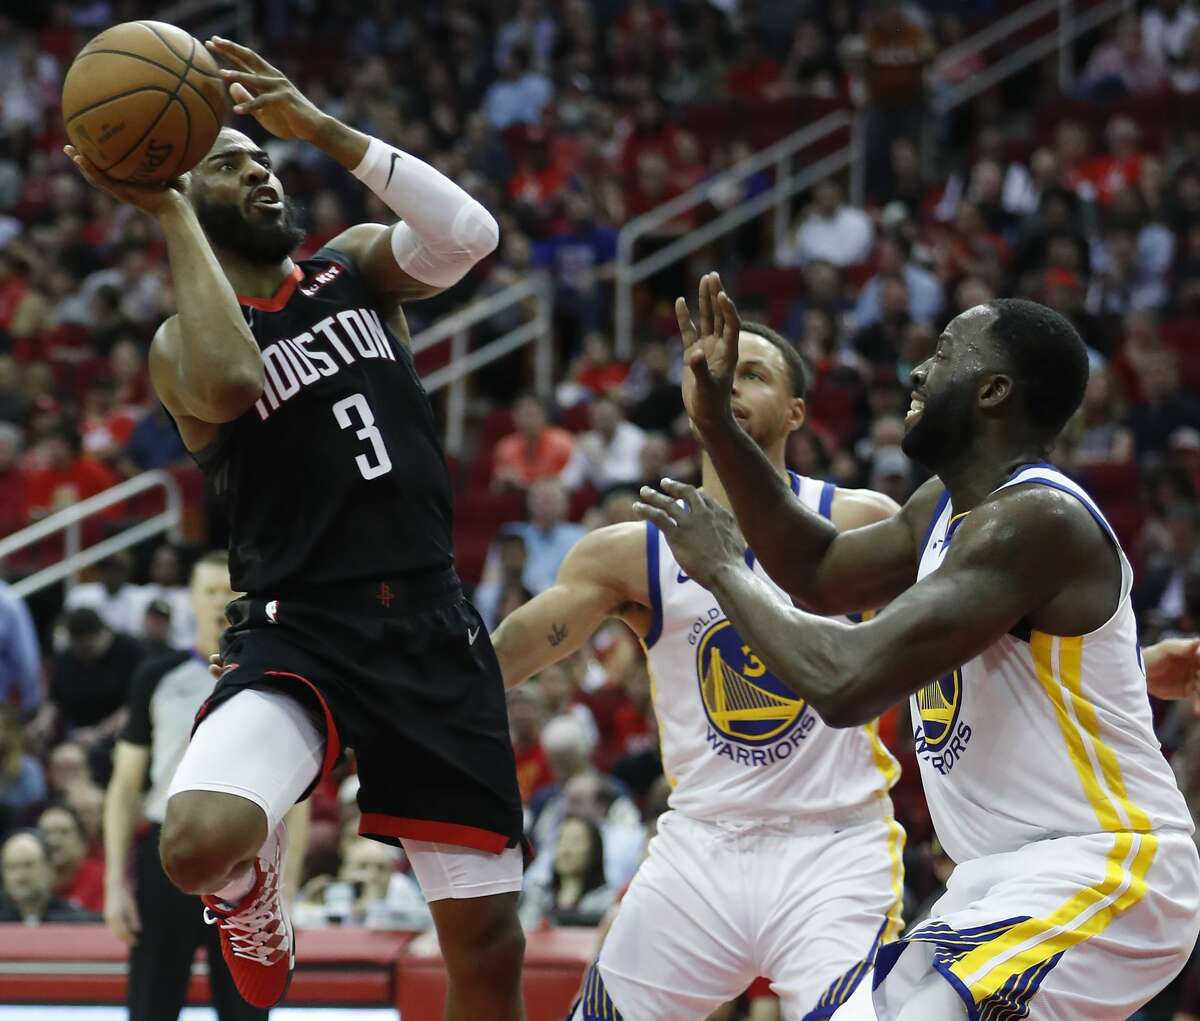 Houston Rockets guard Chris Paul (3) takes a shot against Golden State Warriors guard Stephen Curry (30) and forward Draymond Green (23) during the third quarter of an NBA basketball game at Toyota Center on Wednesday, March 13, 2019, in Houston.